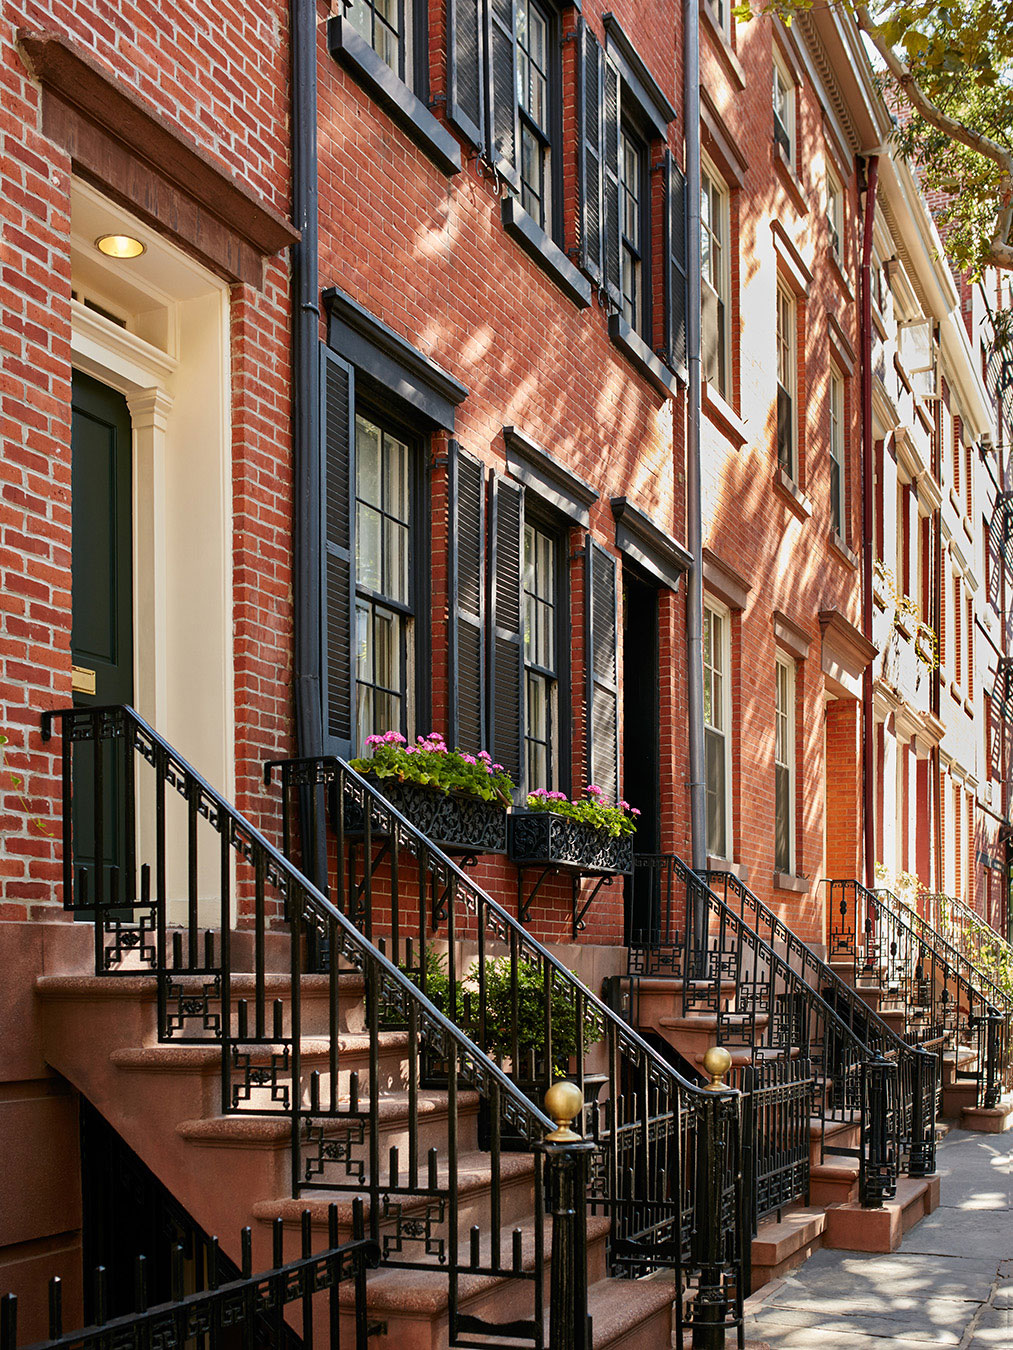 160 Leroy is in West Village, also known as 'Little Bohemia', which remains the cultural heart of New York.